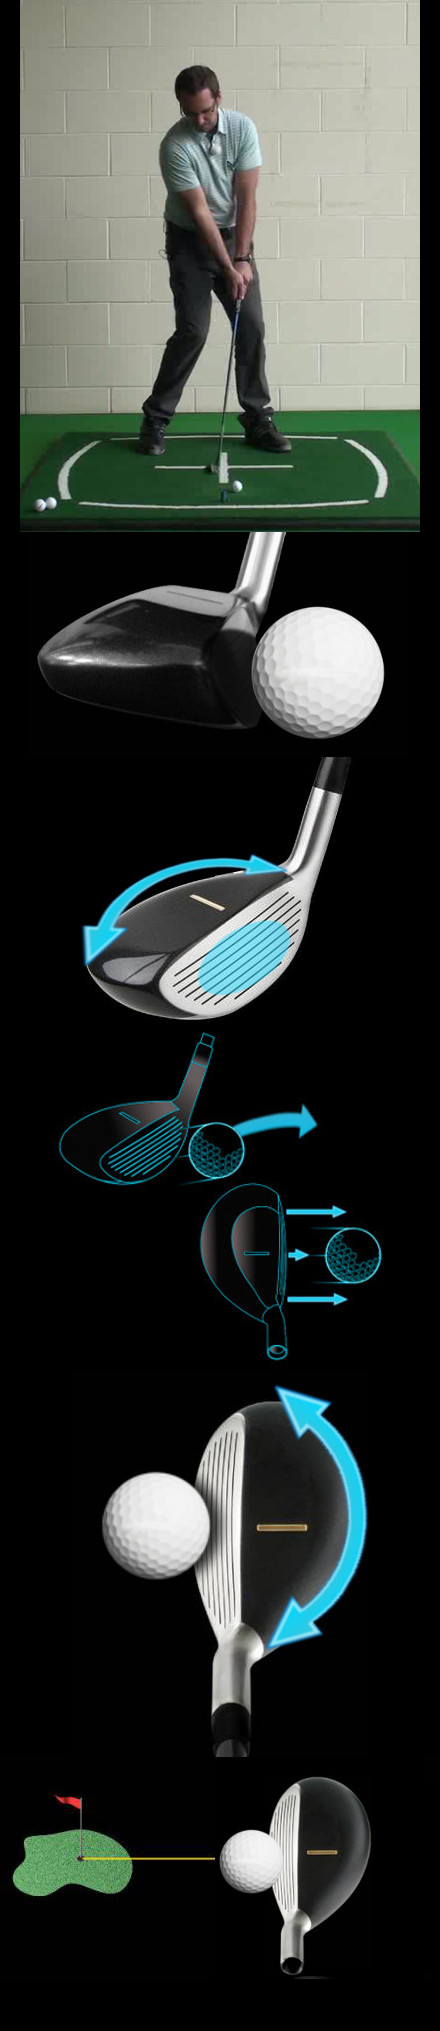 Do Any Top Professionals Use Golf Hybrid Clubs